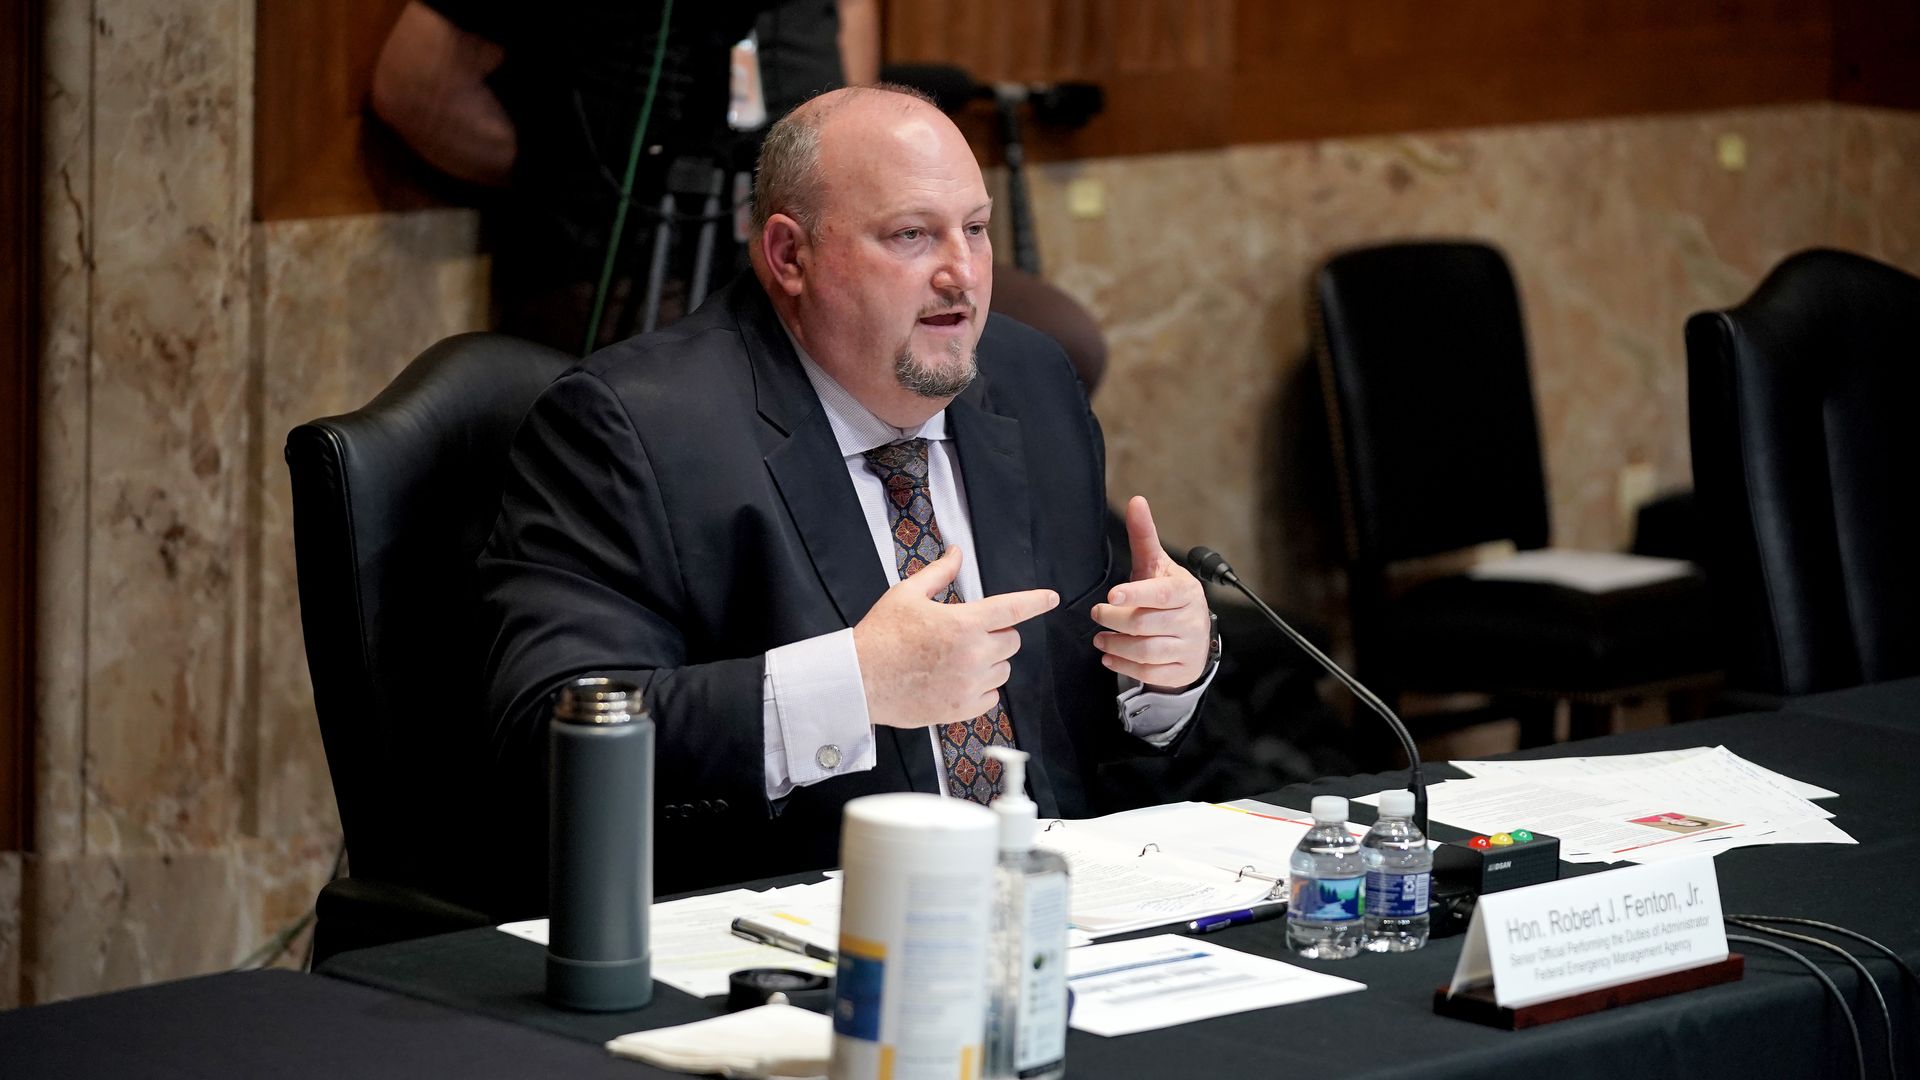 Robert Fenton Jr., acting administrator of the Federal Emergency Management Agency (FEMA), speaks during a Senate Appropriations Subcommittee hearing.